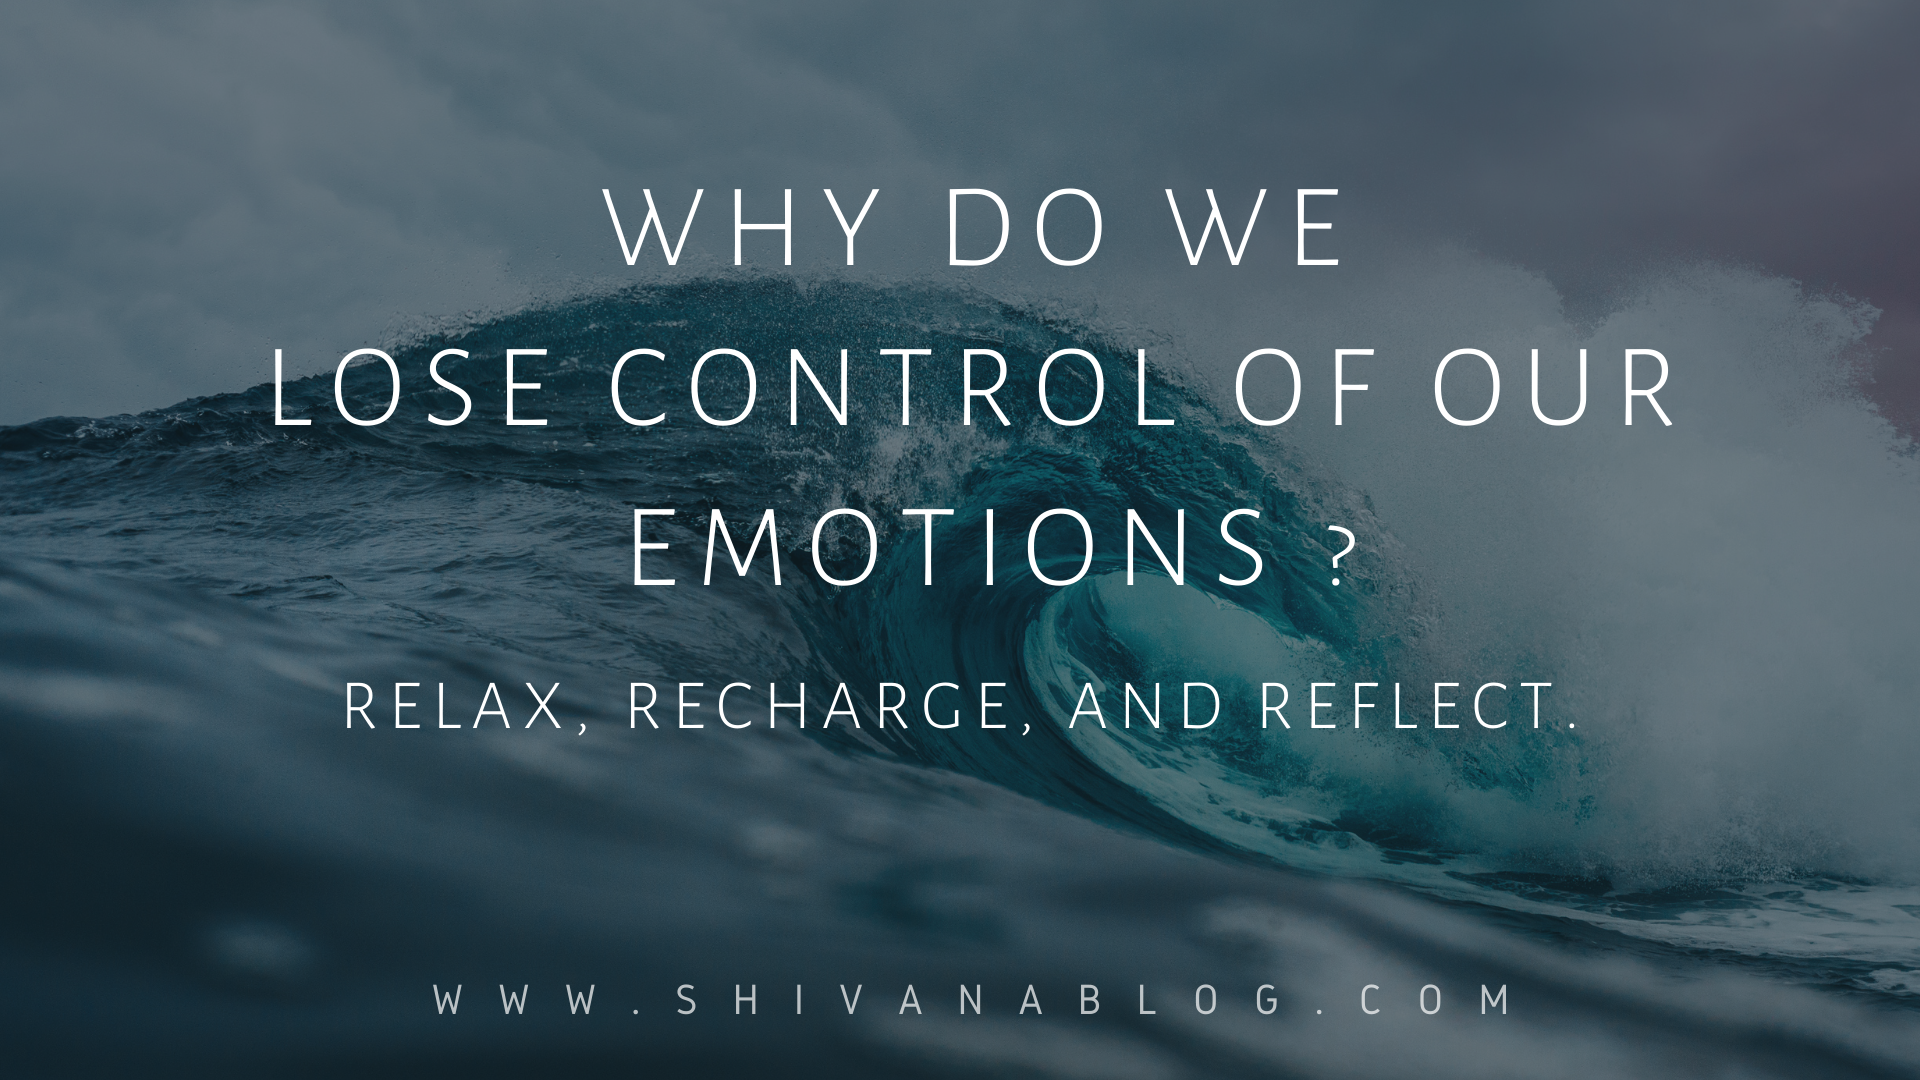 Why do we lose control of our emotions